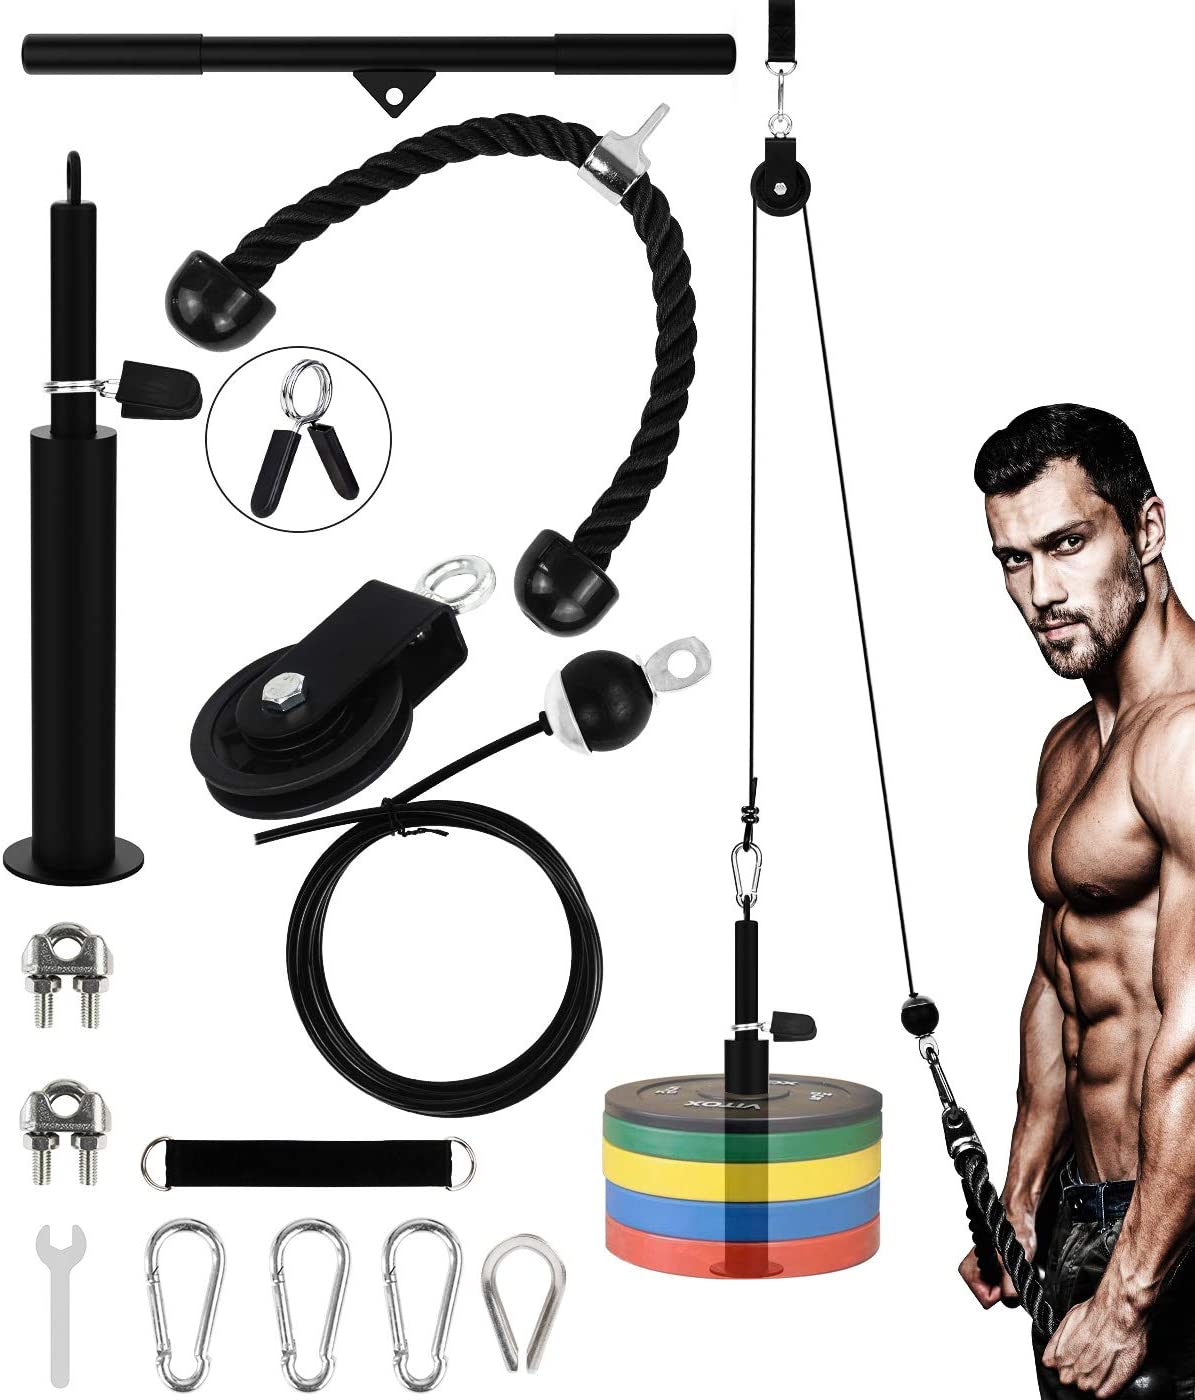 Straight Bar for Triceps Pull Down Back Biceps Curl Fitness LAT and Lift Pulley System,Home Gym Equipment Pulley Cable Machine Attachements for LAT Pulldown Machine with Loading Pin Shoulder